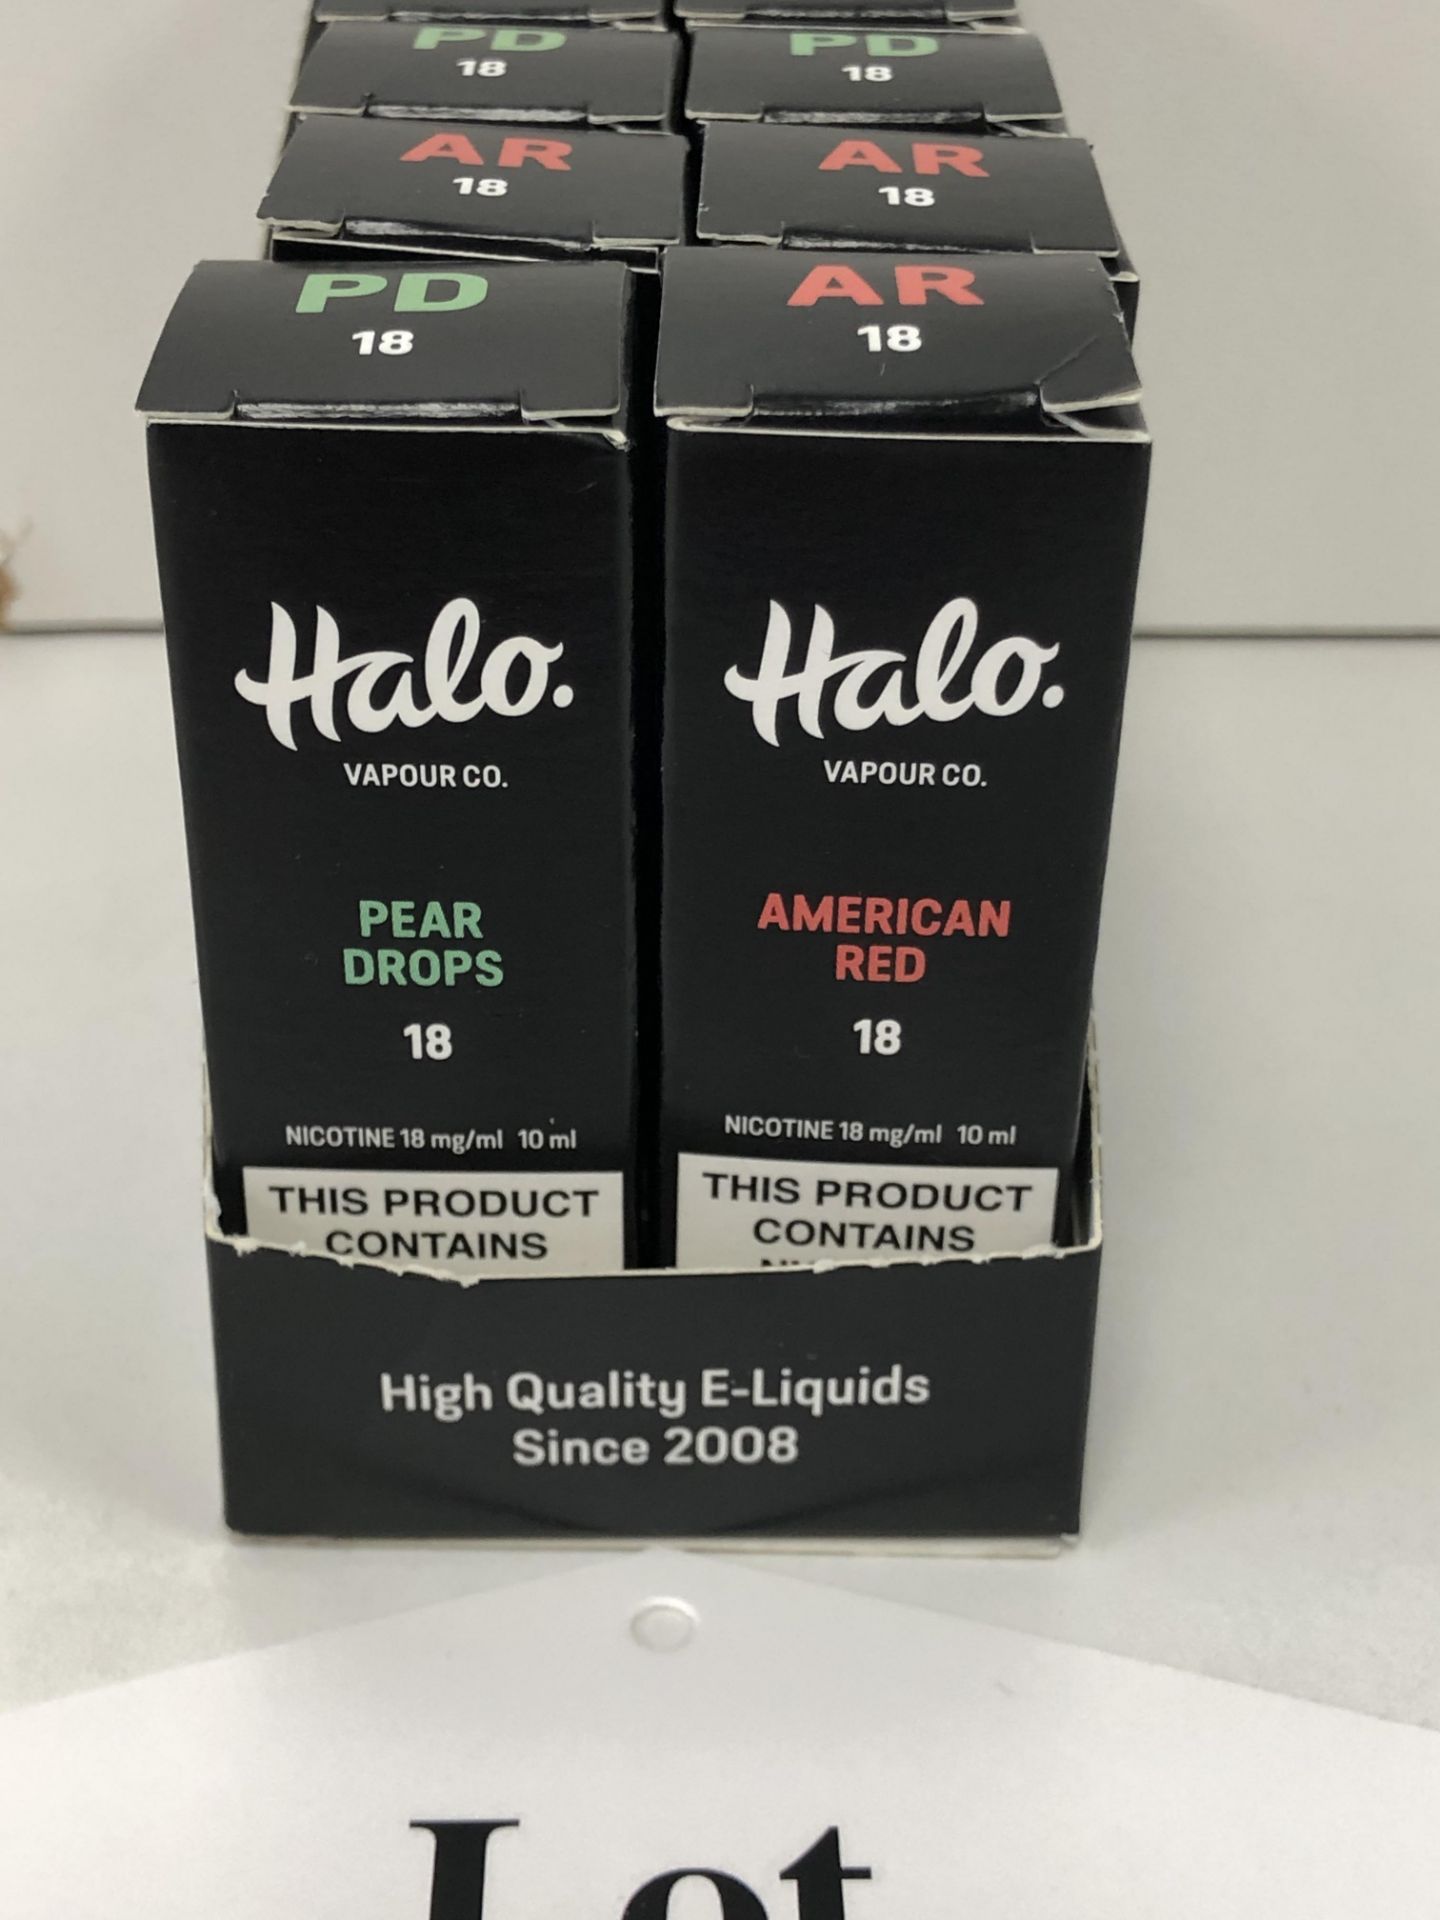 10 x Vapour co Pear drops American red Halo 18 Mg/Ml BNIB- 10 ml |96154519 96129500 - Image 6 of 7